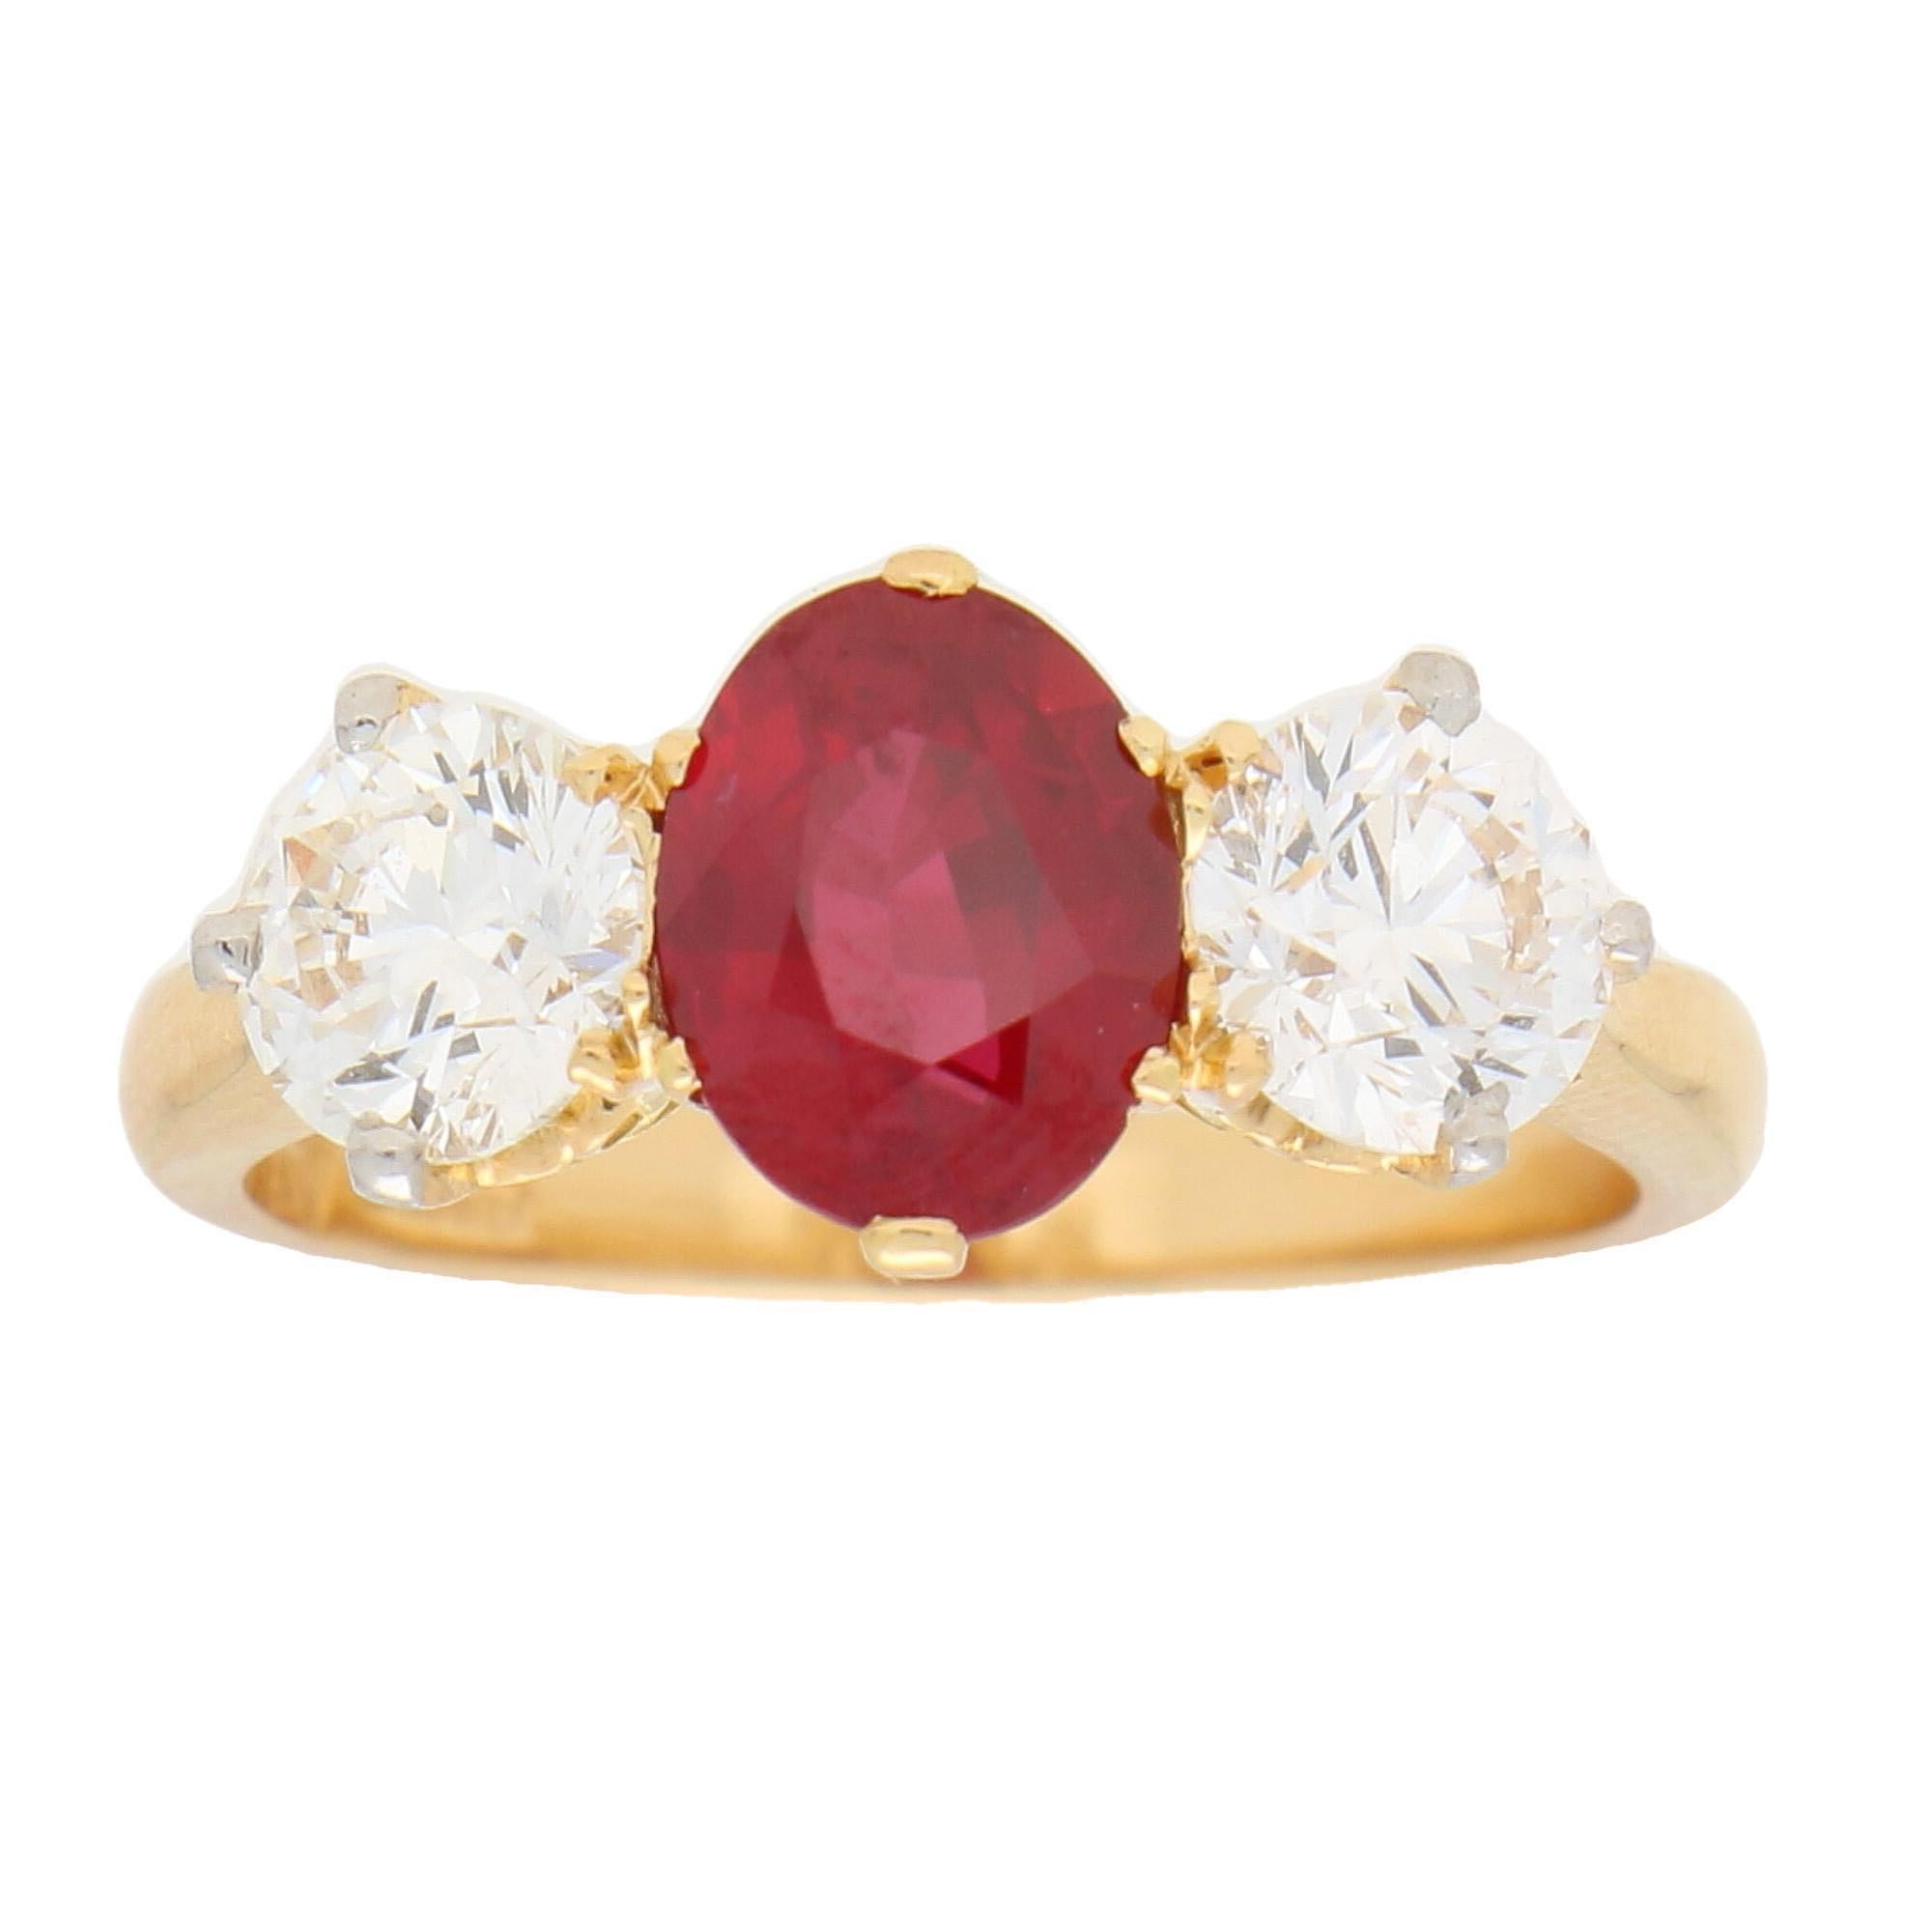 A beautiful vibrant red ruby and diamond trilogy engagement ring set in 18k yellow gold.

This classic design of engagement ring is centrally six-claw set with an oval cut ruby which is a beautiful vibrant red colour. This ruby is then sided by two